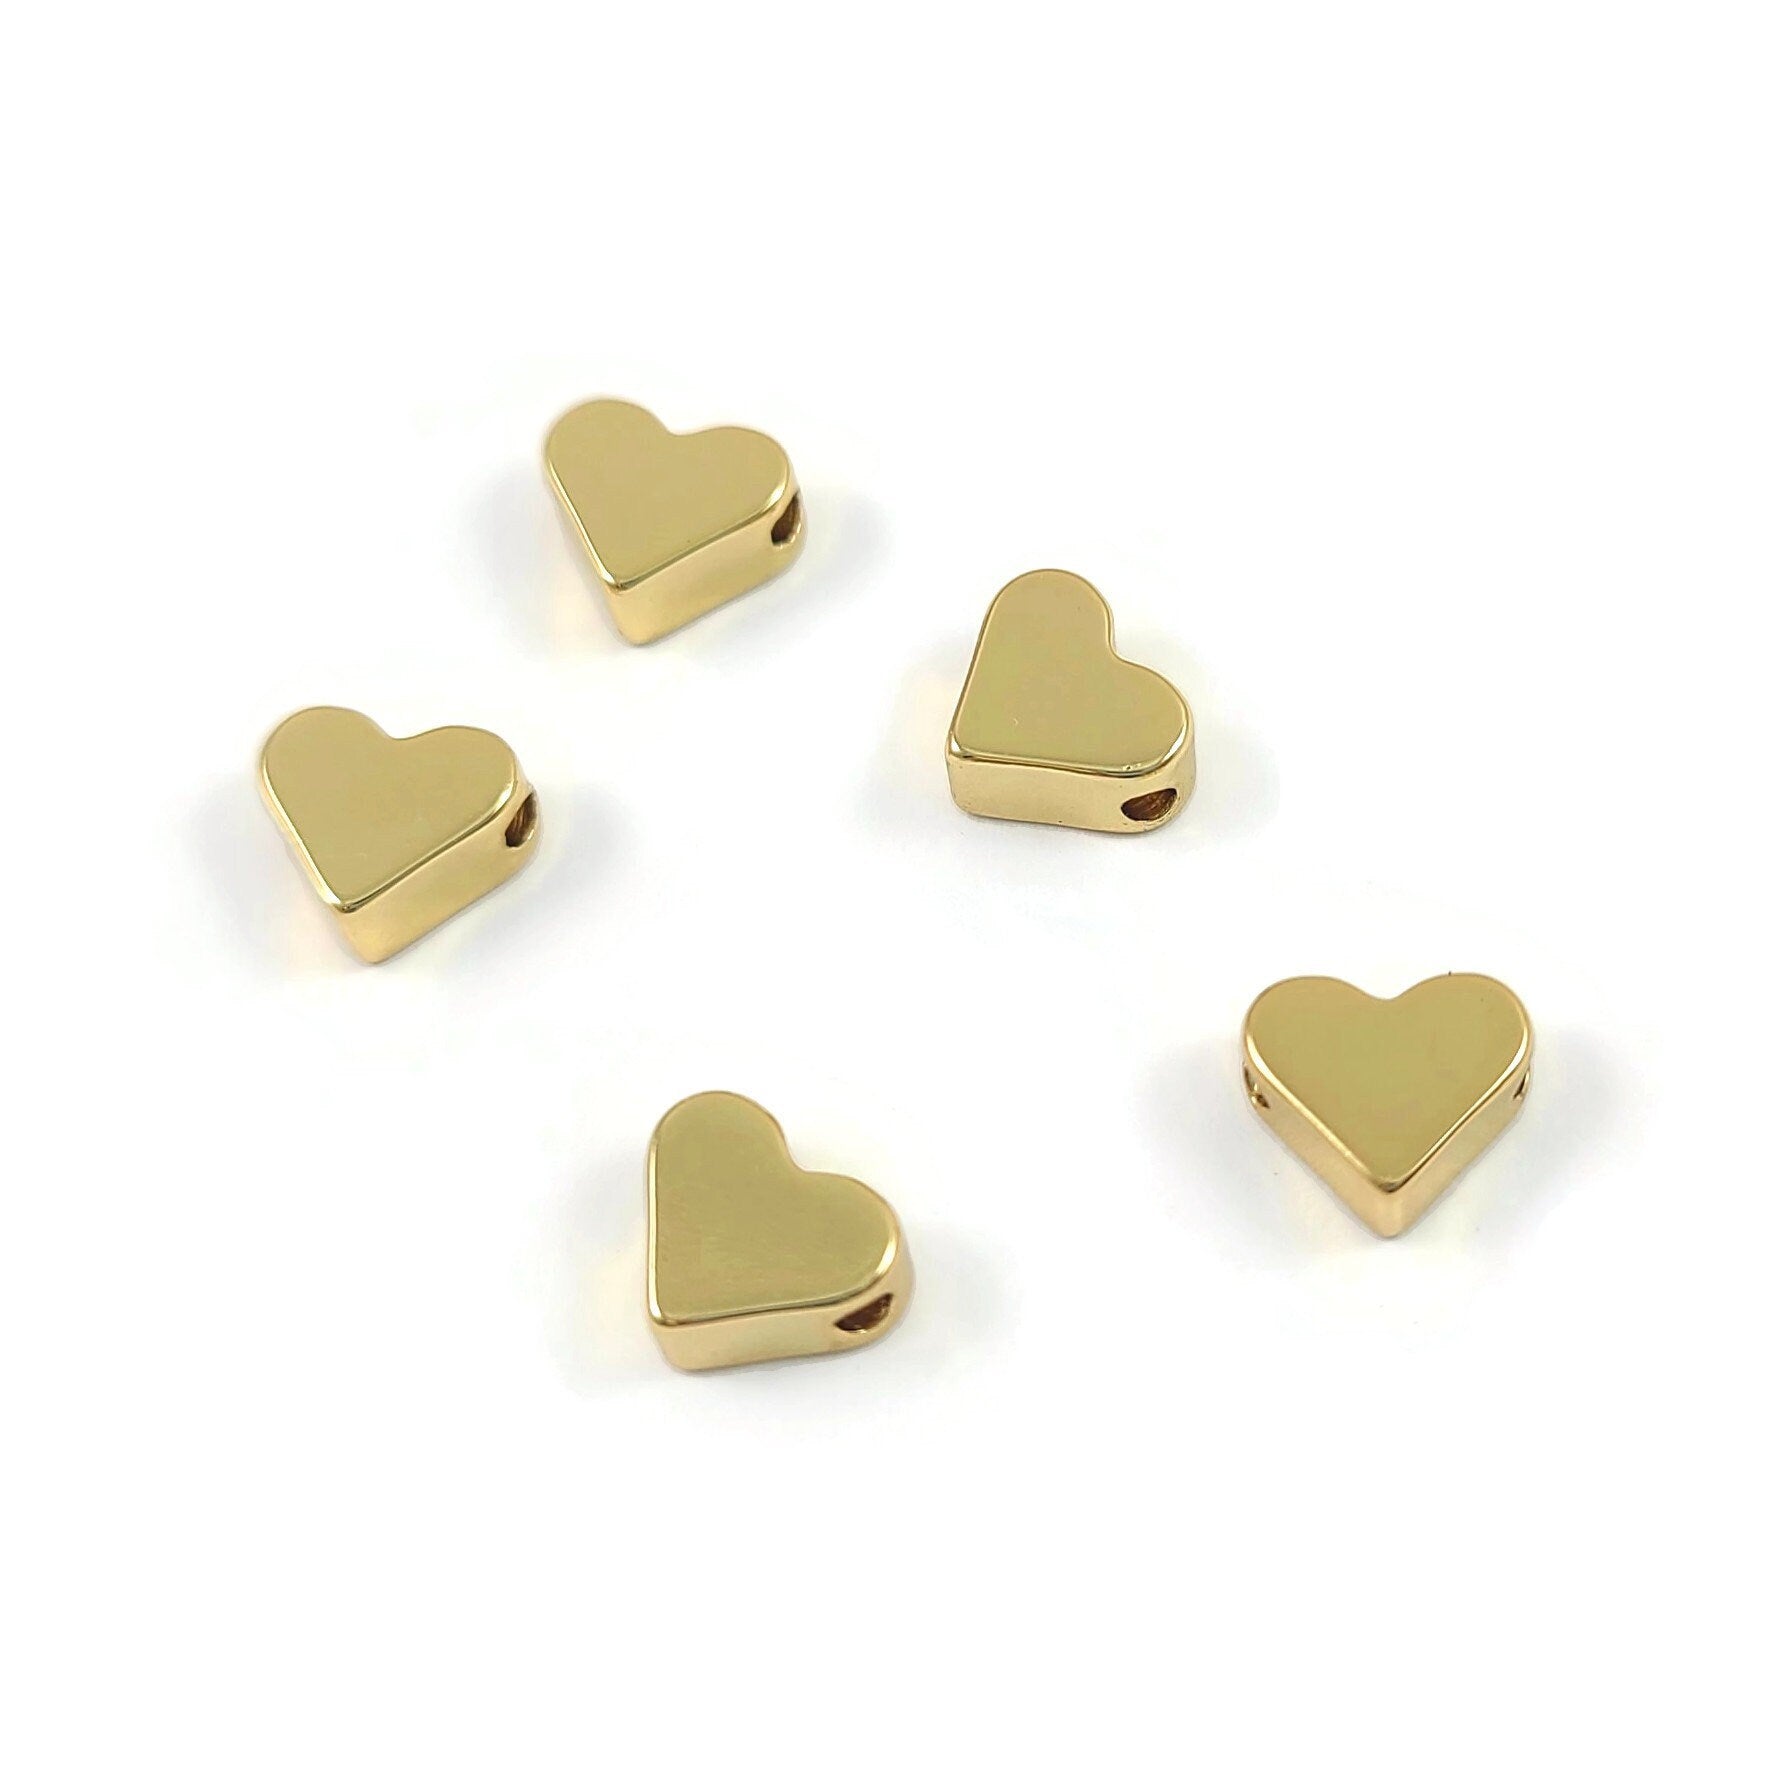 18K real gold plated heart beads, Hypoallergenic nickel free spacers